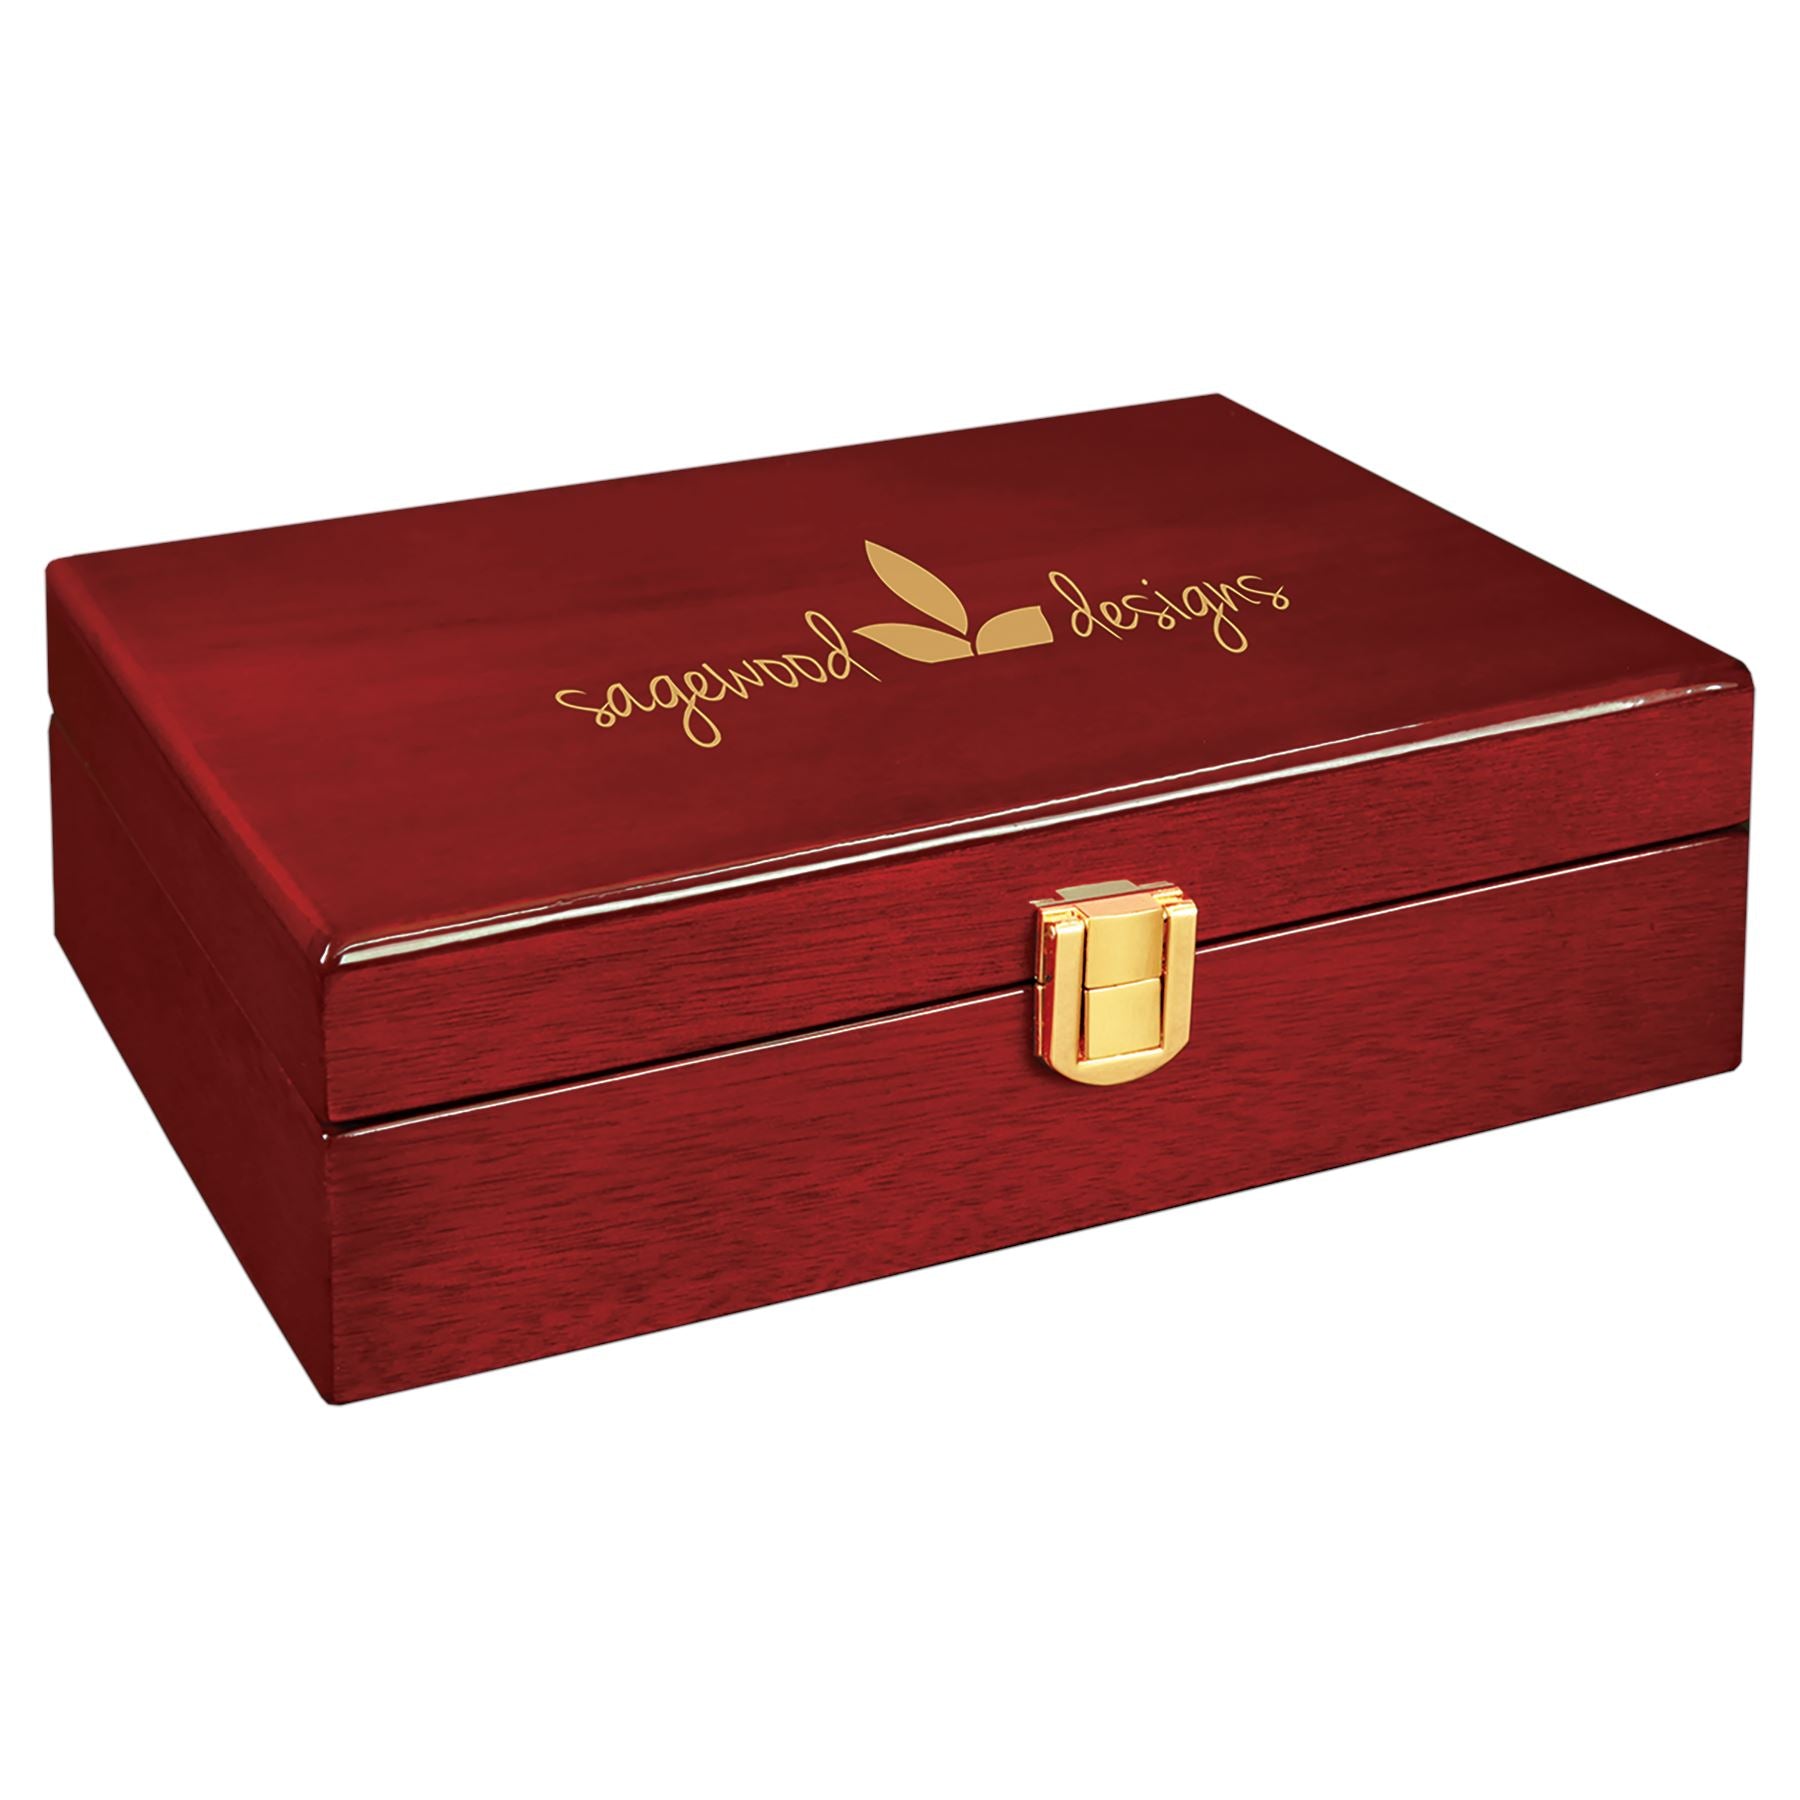 Rosewood Piano Finish Gift Box, 7 3/4" x 6 1/4" x 2 3/8", Laser Engraved Gift Box Craftworks NW 